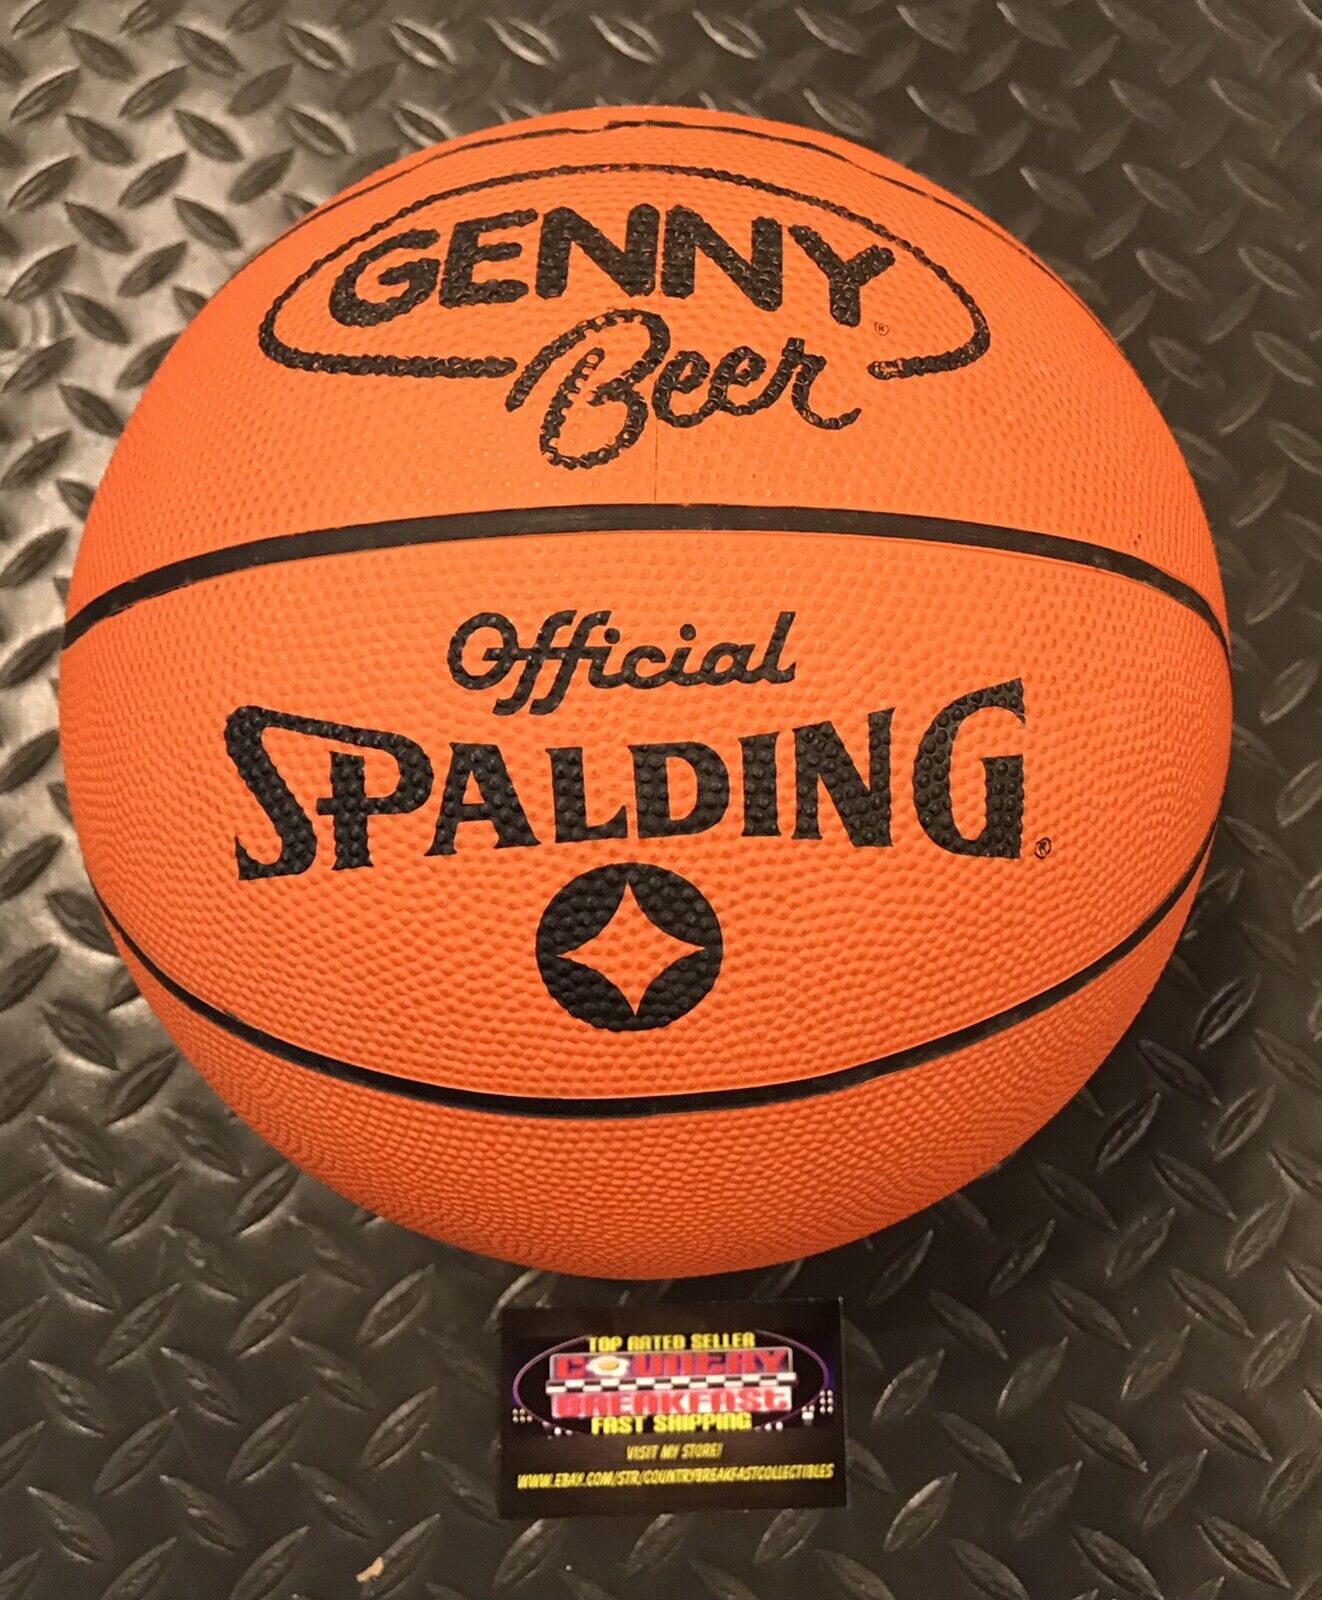 Genesee Genny Beer Spalding Basketball Official Size - New Old Stock